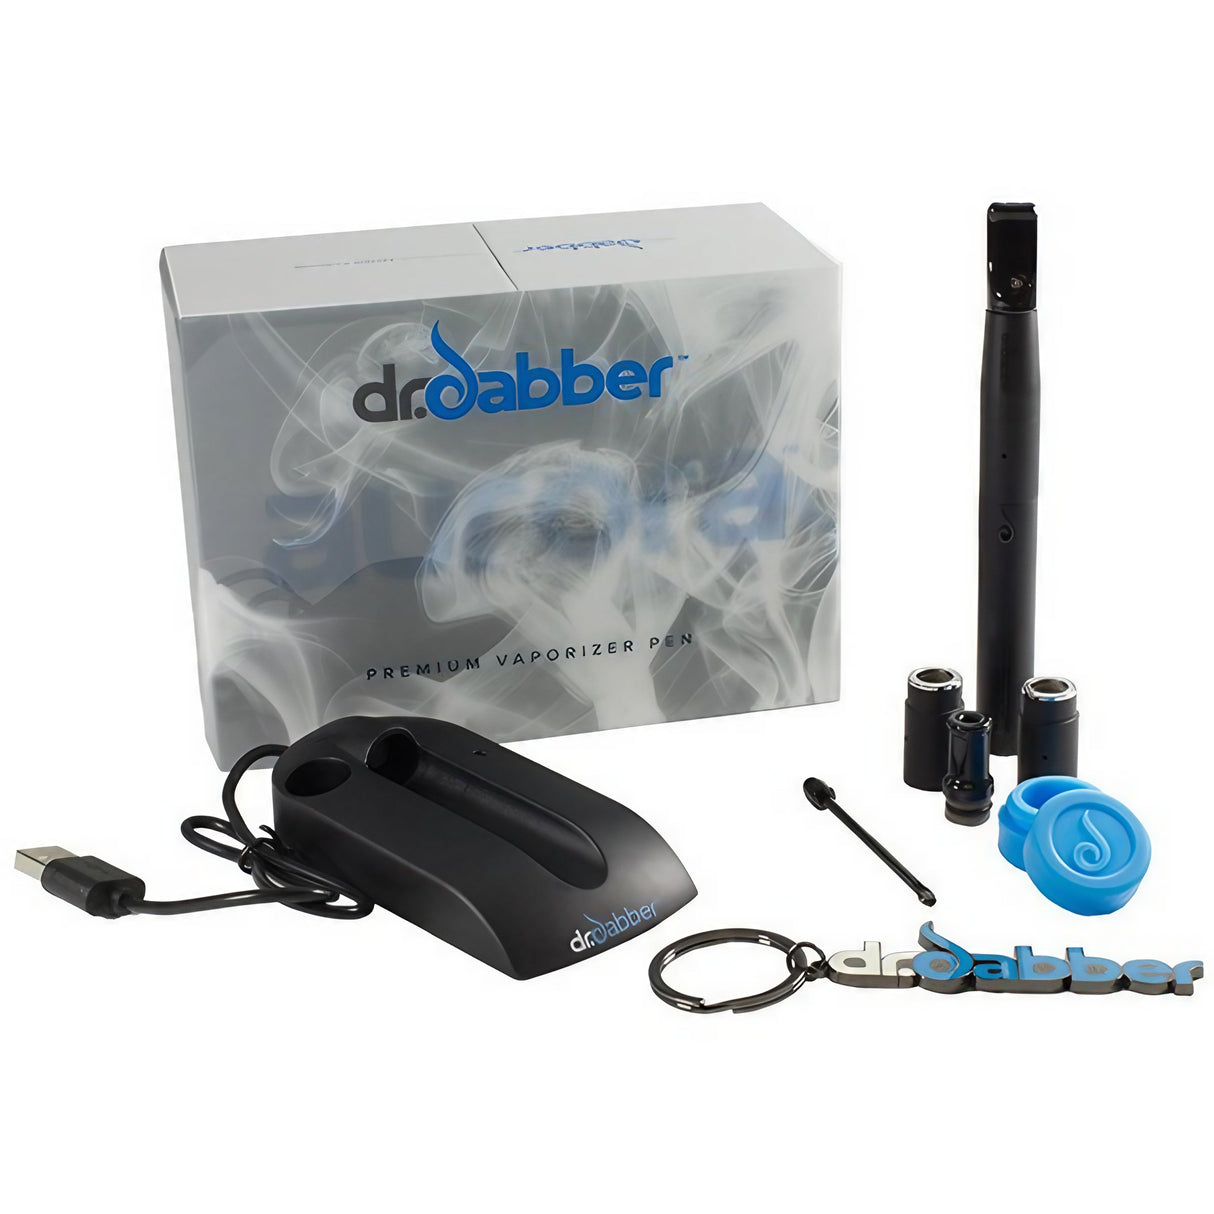 Dr Dabber Aurora Vaporizer Aaron Kai Edition with ceramic & quartz chambers, charger, and tool